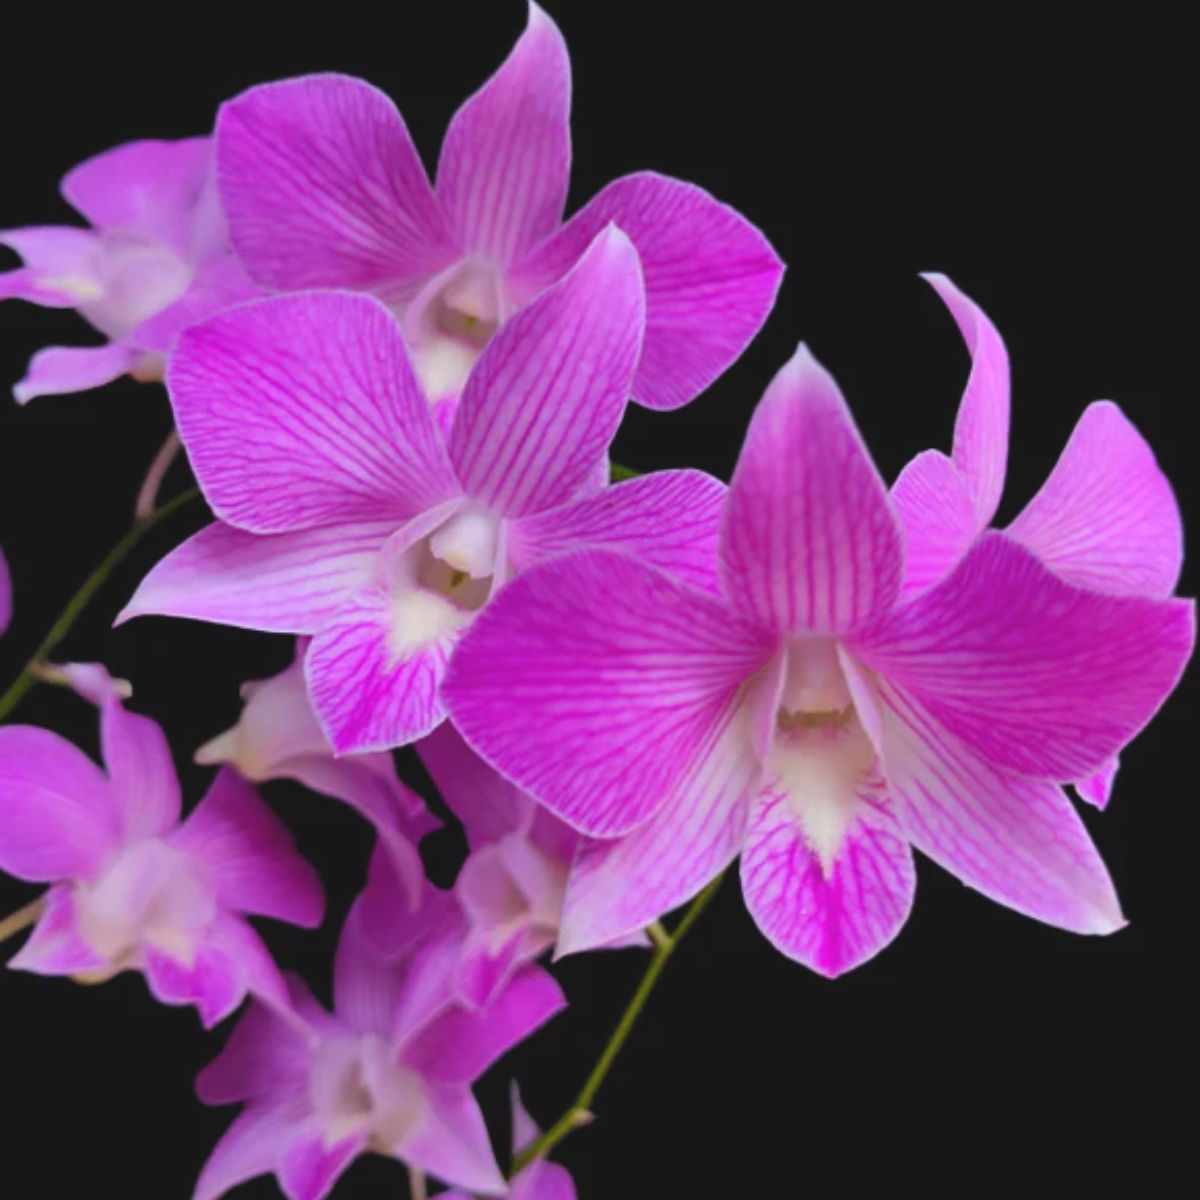 Dendrobium Karen x Compactum orchid flower - A stunning floral marvel showcasing the beauty of Karen and Compactum orchid varieties